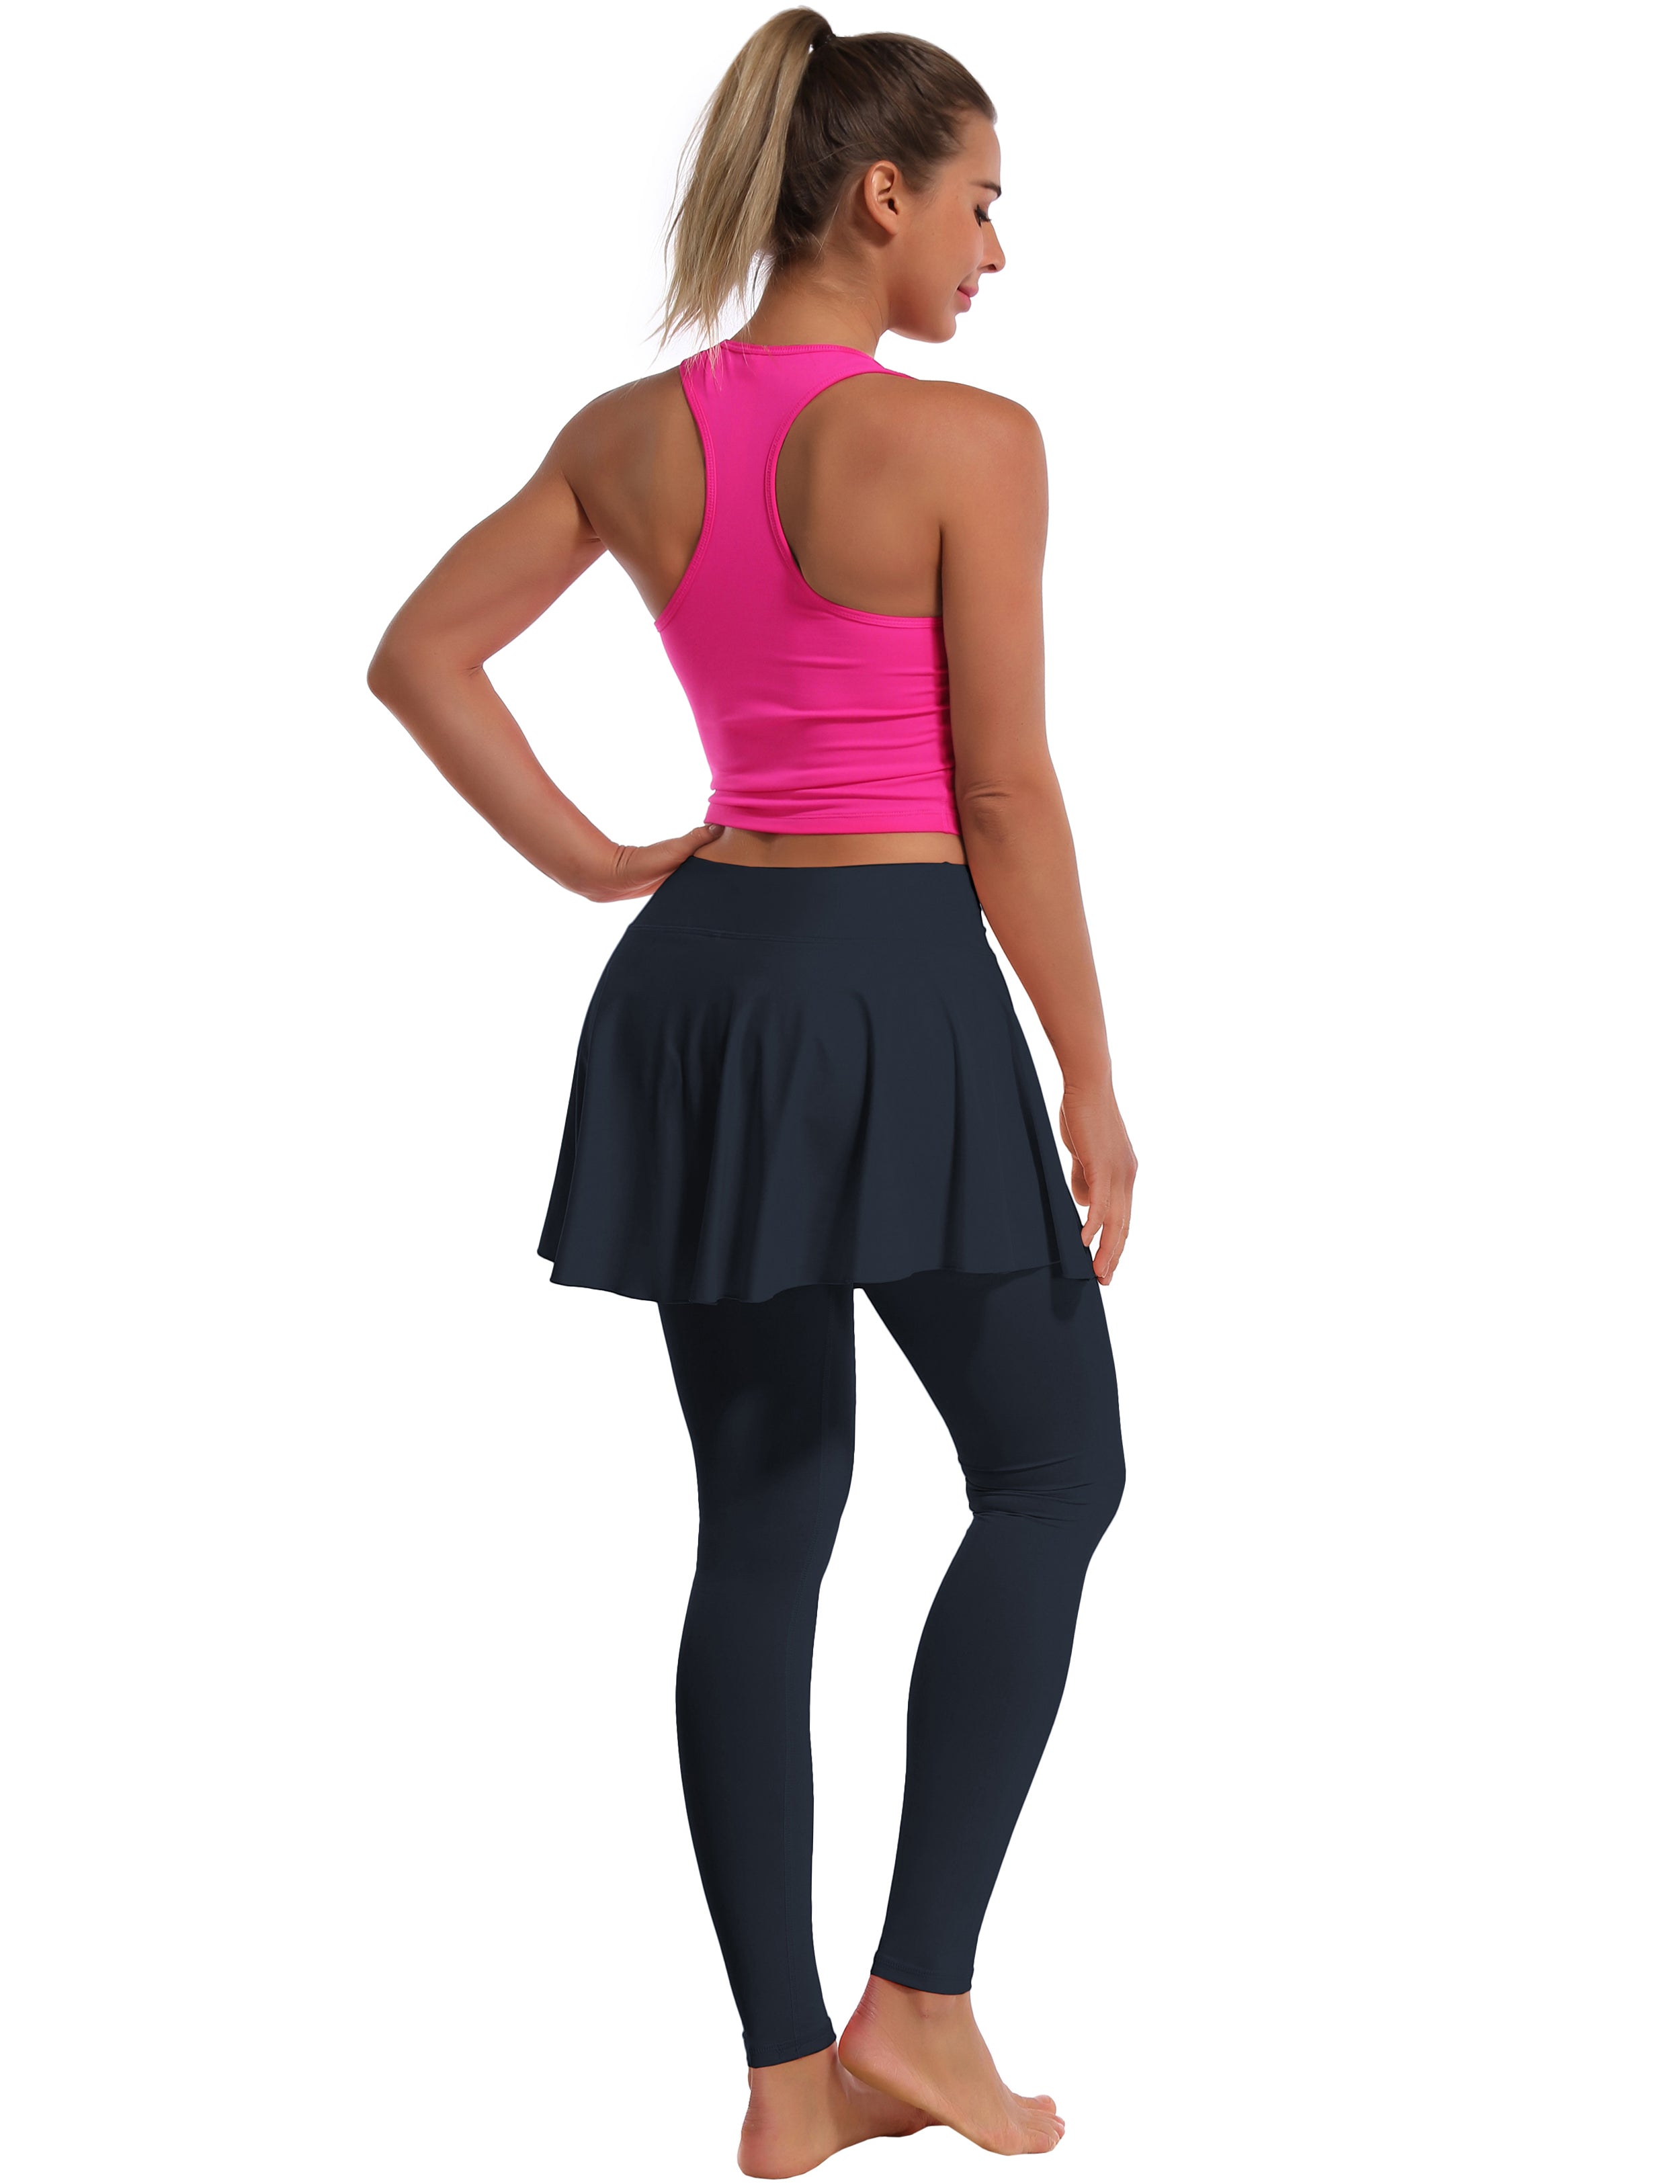 Athletic Tennis Golf Skort with Pocket Shorts darknavy 80%Nylon/20%Spandex UPF 50+ sun protection Elastic closure Lightweight, Wrinkle Moisture wicking Quick drying Secure & comfortable two layer Hidden pocket